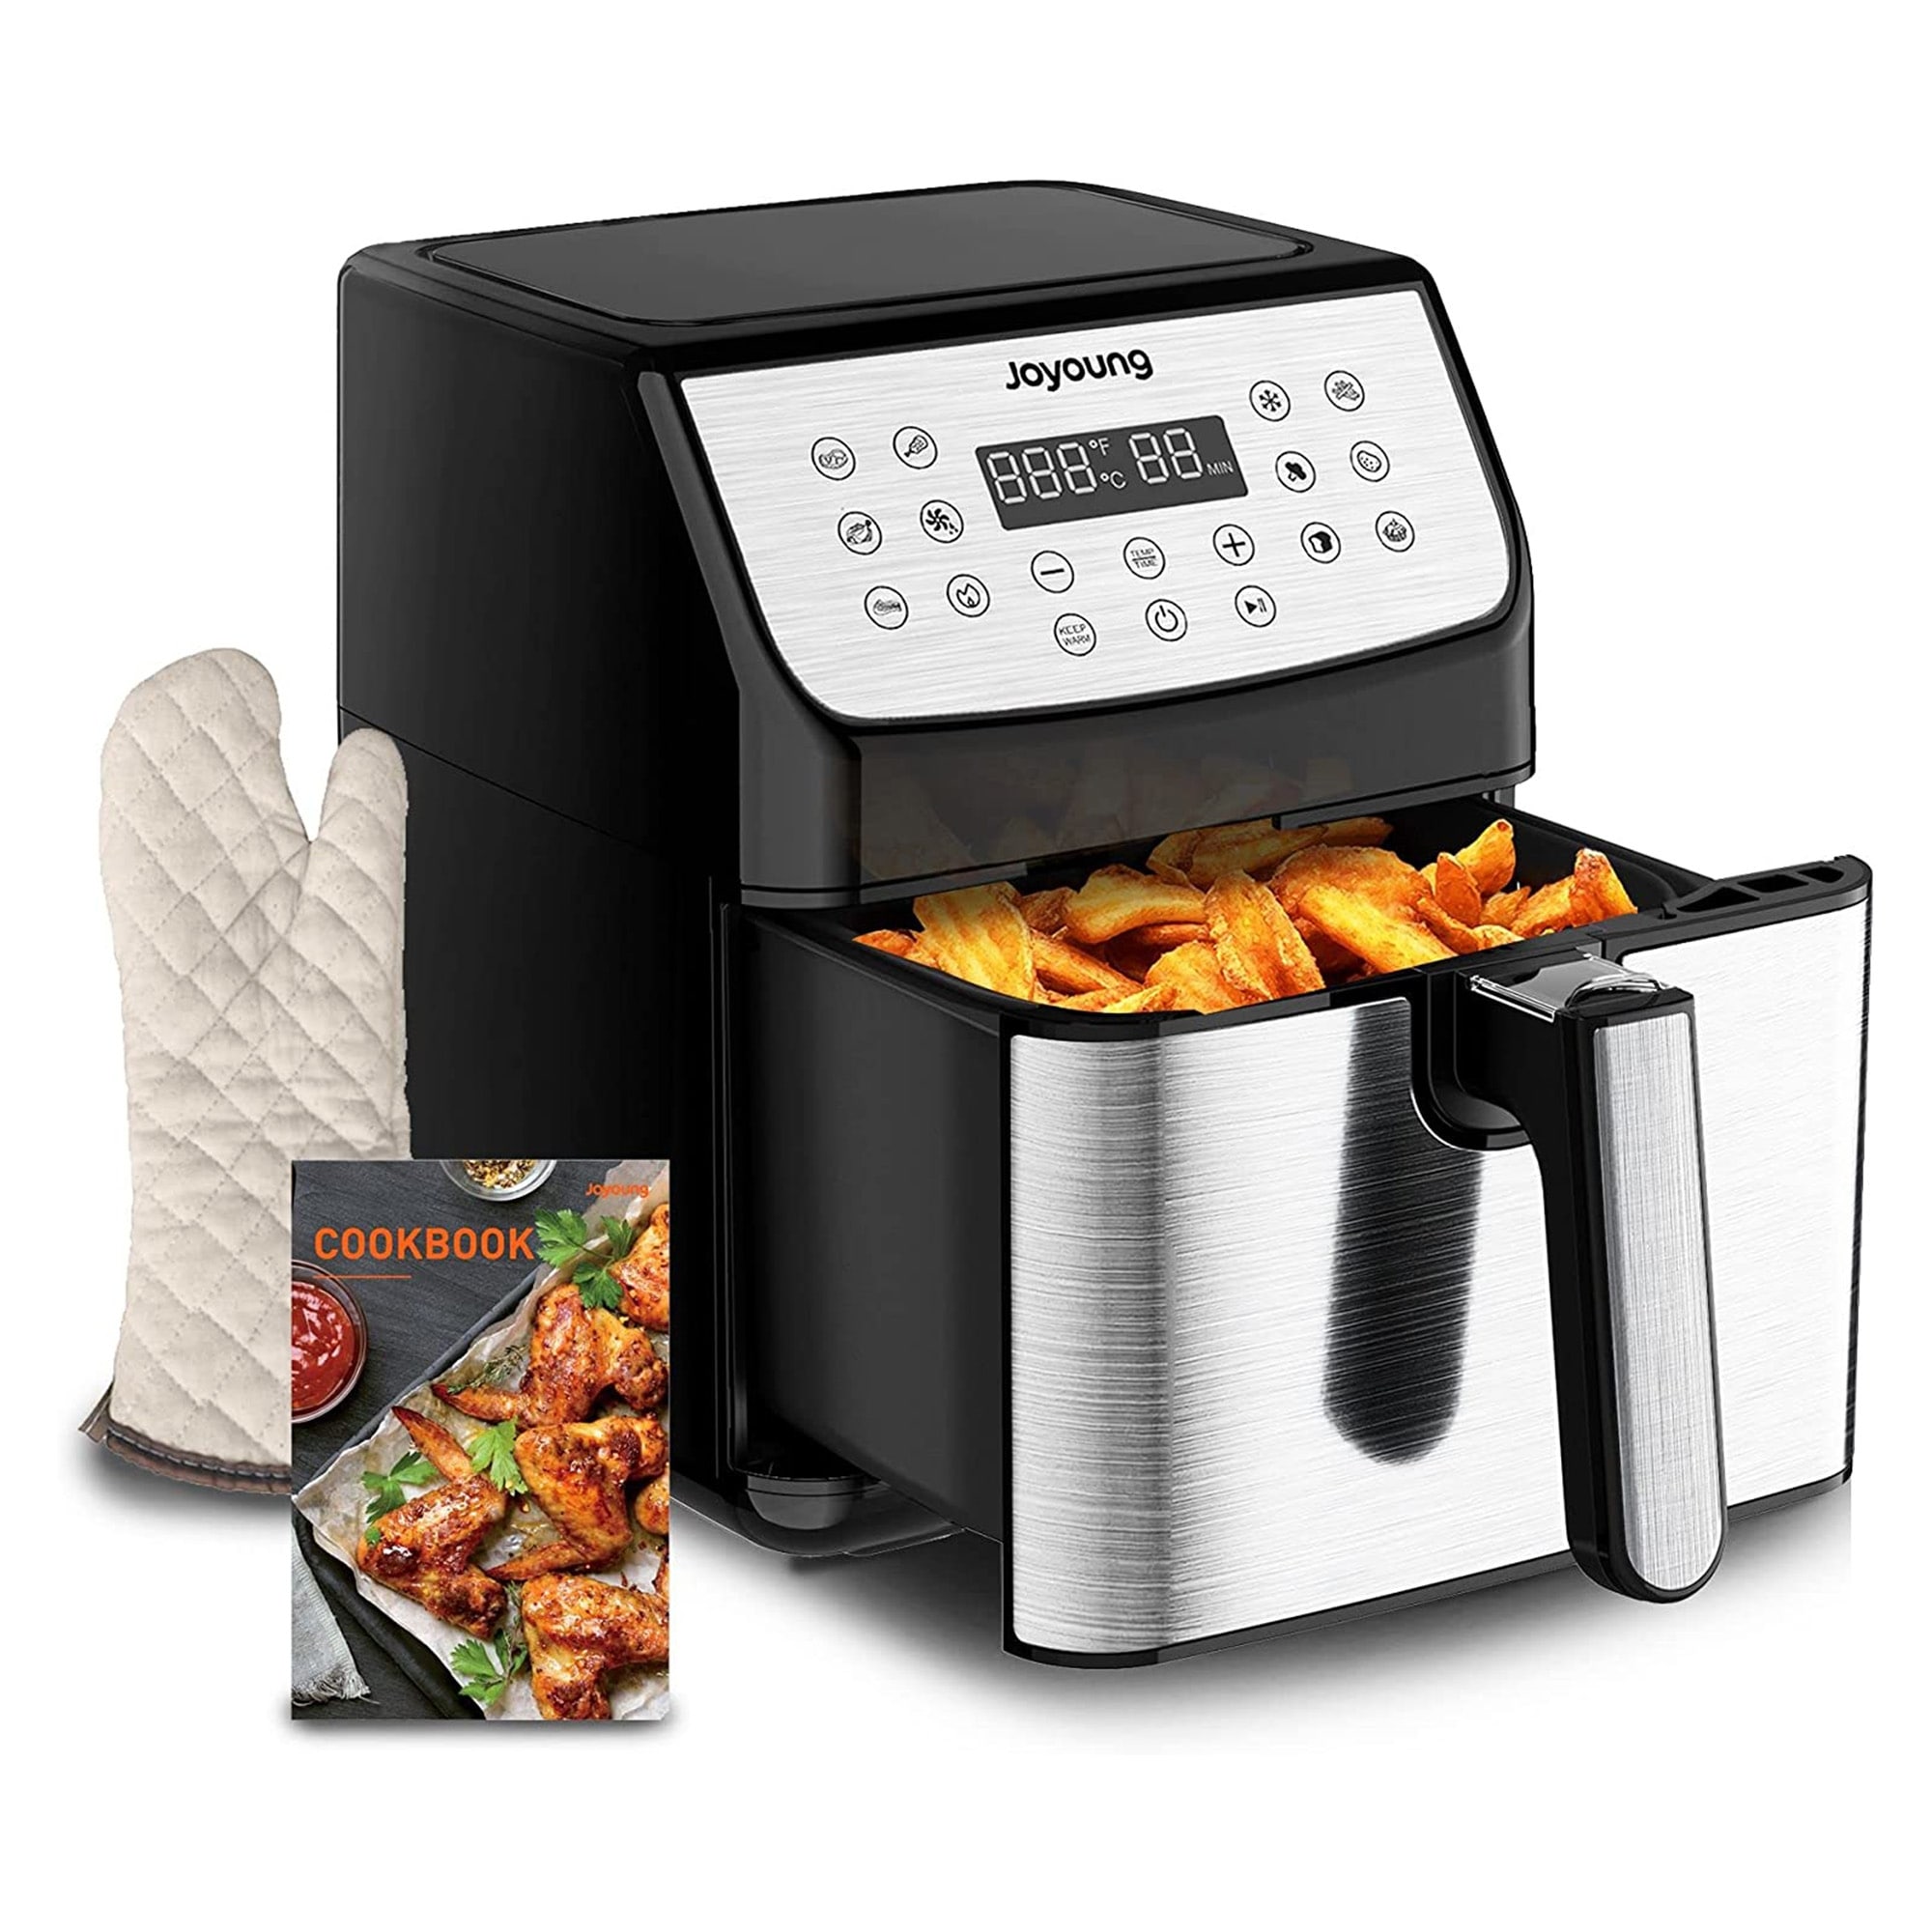 Joyoung Quart Stainless Steel Multi Double Basket Air Fryer with 13 Built In Smart Programs, Black - 12.3 - Bed Bath & Beyond - 36494983